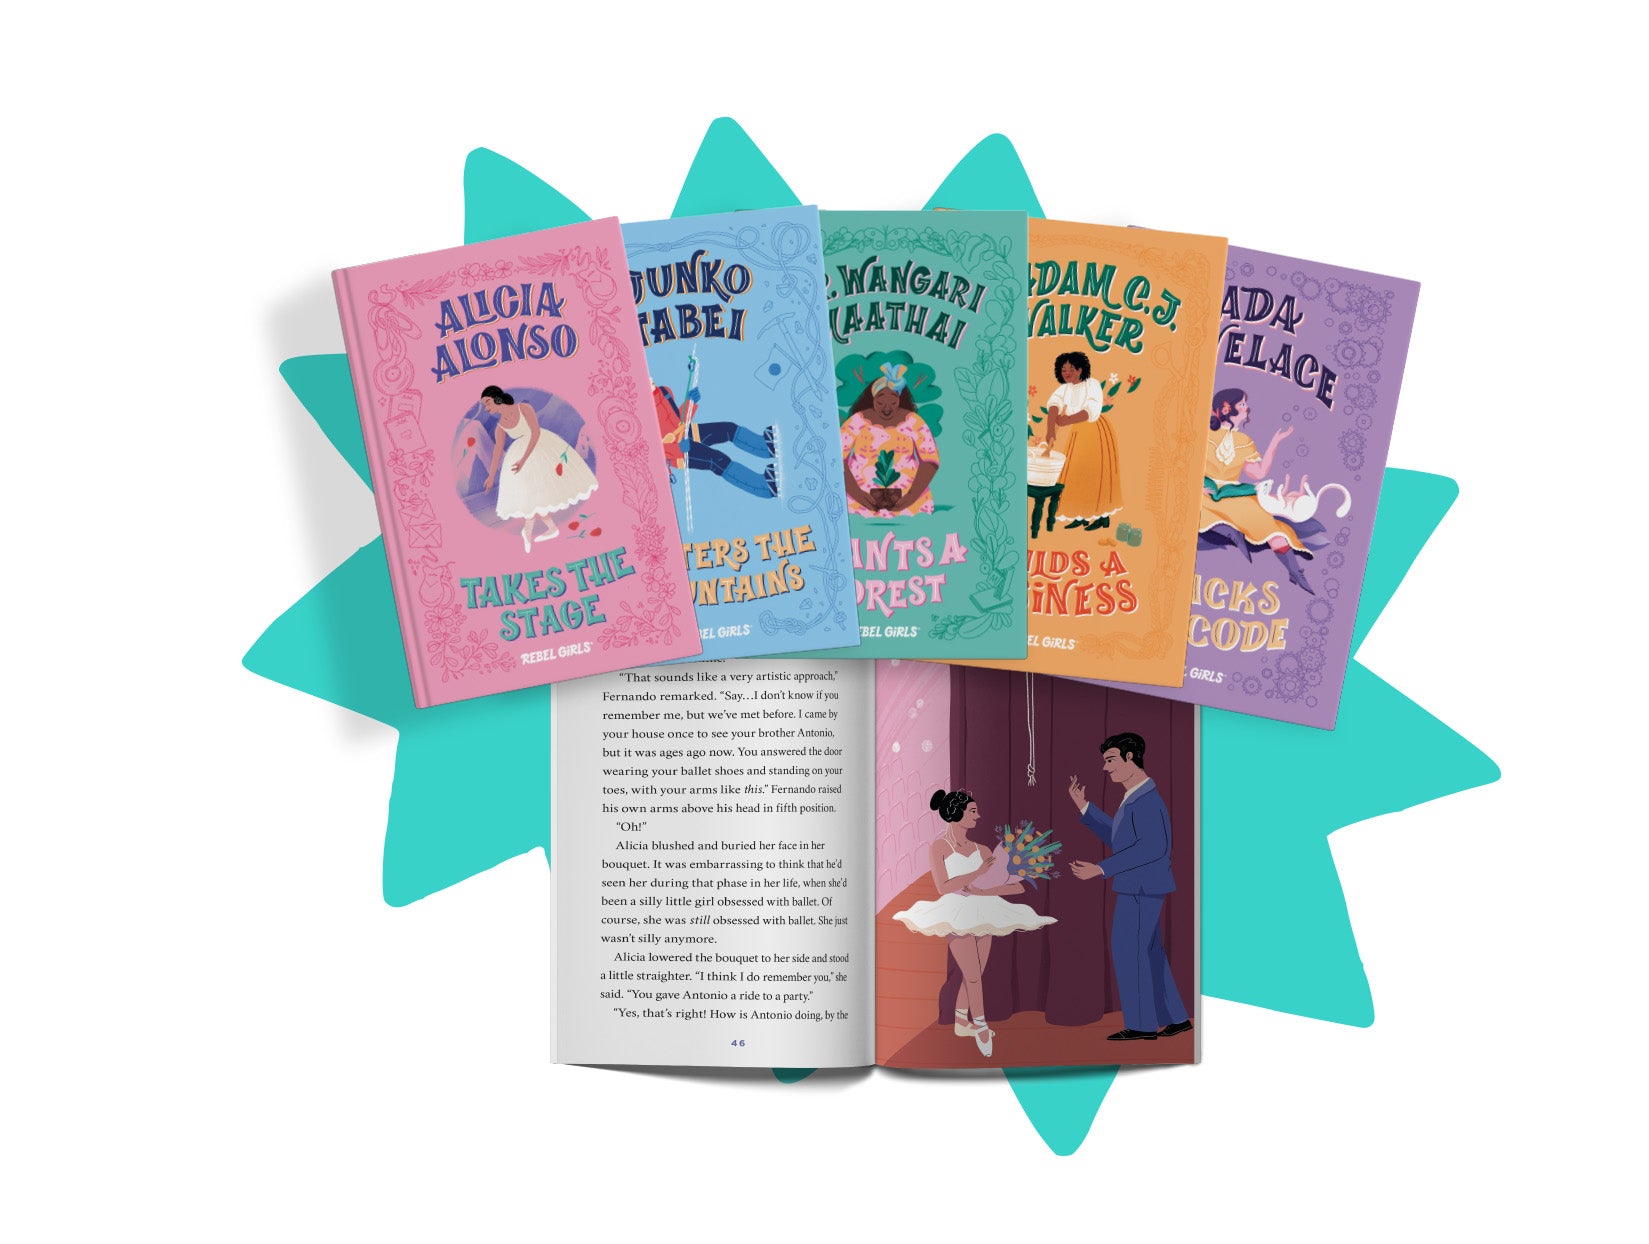 <p>From the creators of the bestselling Good Night Stories for Rebel Girls series comes an irresistible collection of five chapter books about the real lives of five extraordinary women throughout history. </p>
<p>This gorgeous hardcover boxed set is the perfect gift to inspire any young reader. It contains five individual, historical fiction chapter books, each exploring the life and times of an extraordinary woman in global history. </p>
<p>Readers will meet Ada Lovelace — a nineteenth-century pioneer in computer science, Madam C. J. Walker — an early leader in the African American beauty industry, Dr. Wangari Maathai — an environmental warrior and Nobel Peace Prize winner from Kenya, Junko Tabei — a champion in mountaineering who became the first woman to summit Mount Everest, and Alicia Alonso — a prima ballerina and remarkable creator in the world of dance. </p>
<p>Each stunningly designed chapter book features at least ten full-color illustrations from a female artist, as well as bonus activities in the backmatter to encourage kids to explore the various fields in which each of these women thrived.</p>
